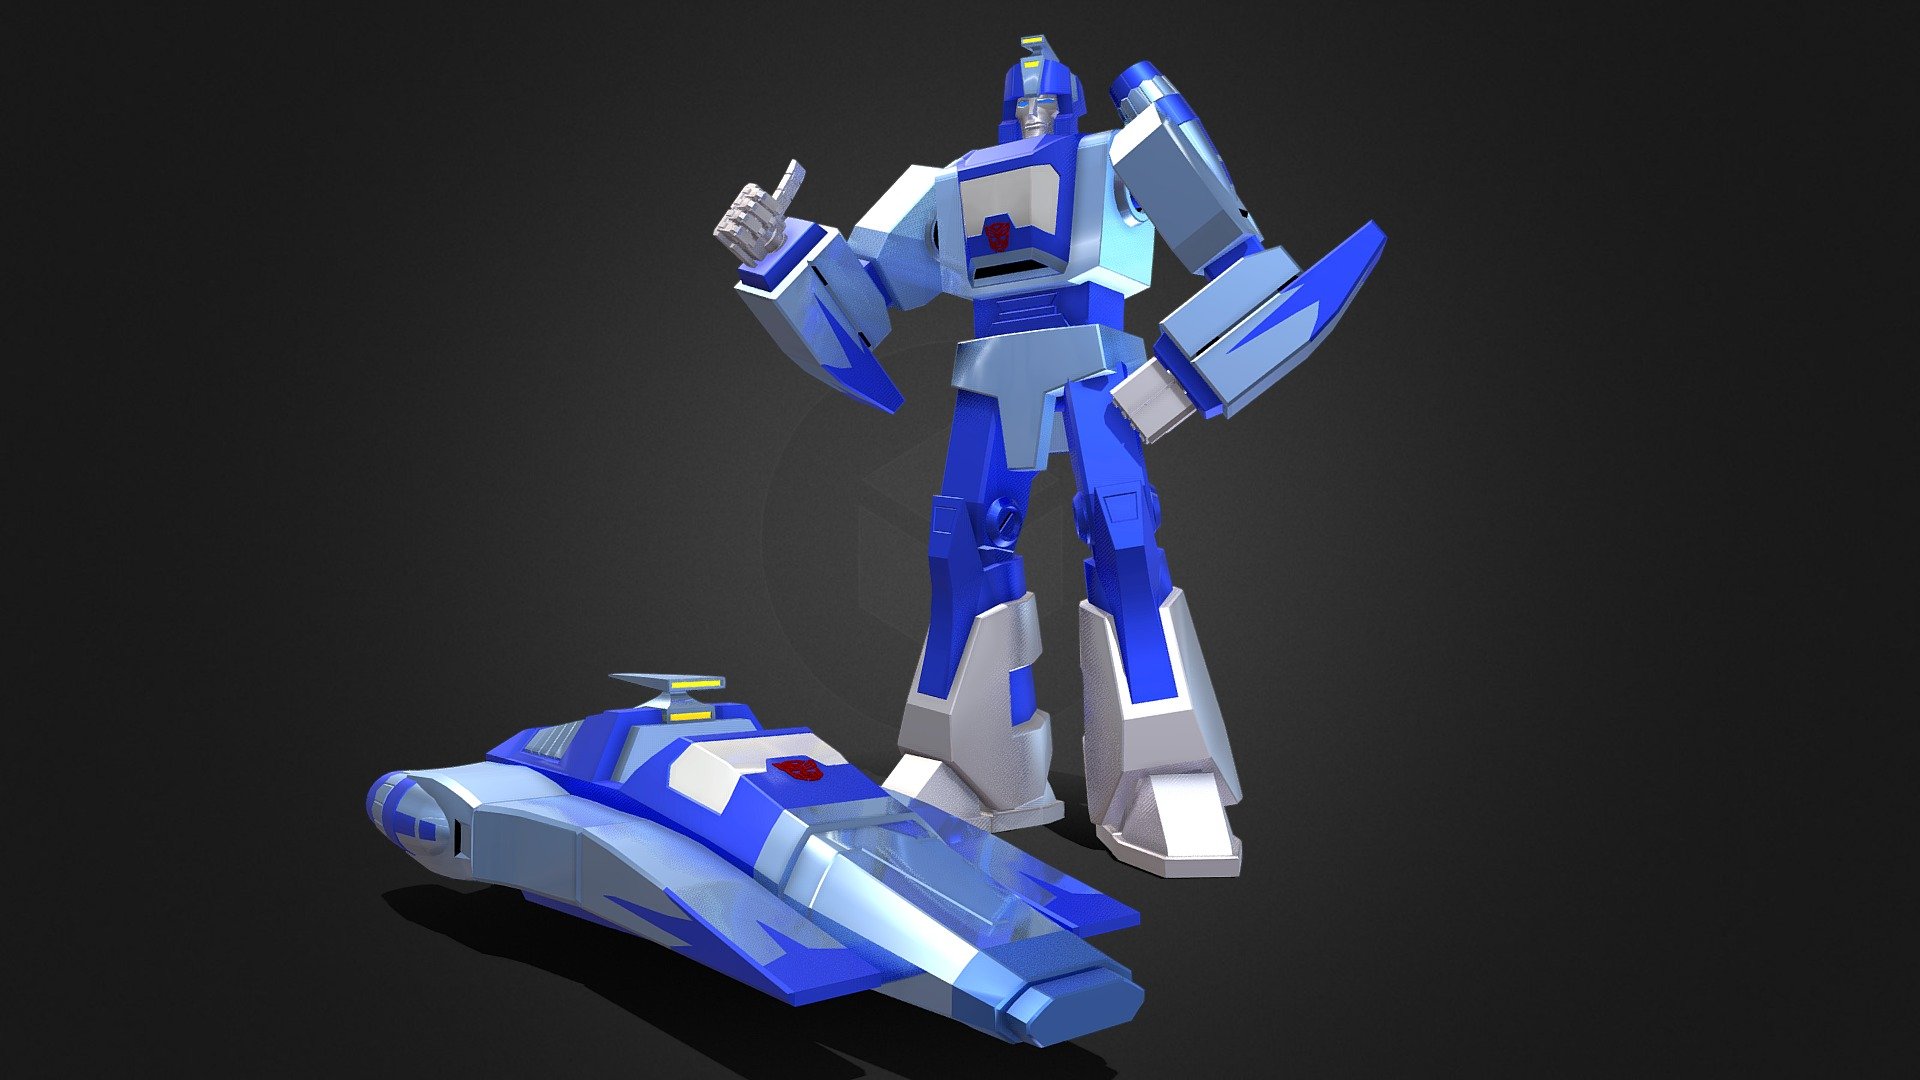 If you're interested in purchasing any of my models, contact me @ andrewdisaacs@yahoo.com

Blurr from Transformers The Movie (1986) and Season 3 of the Generation 1 cartoon. 

Made by myself in 3DS Max 3d model